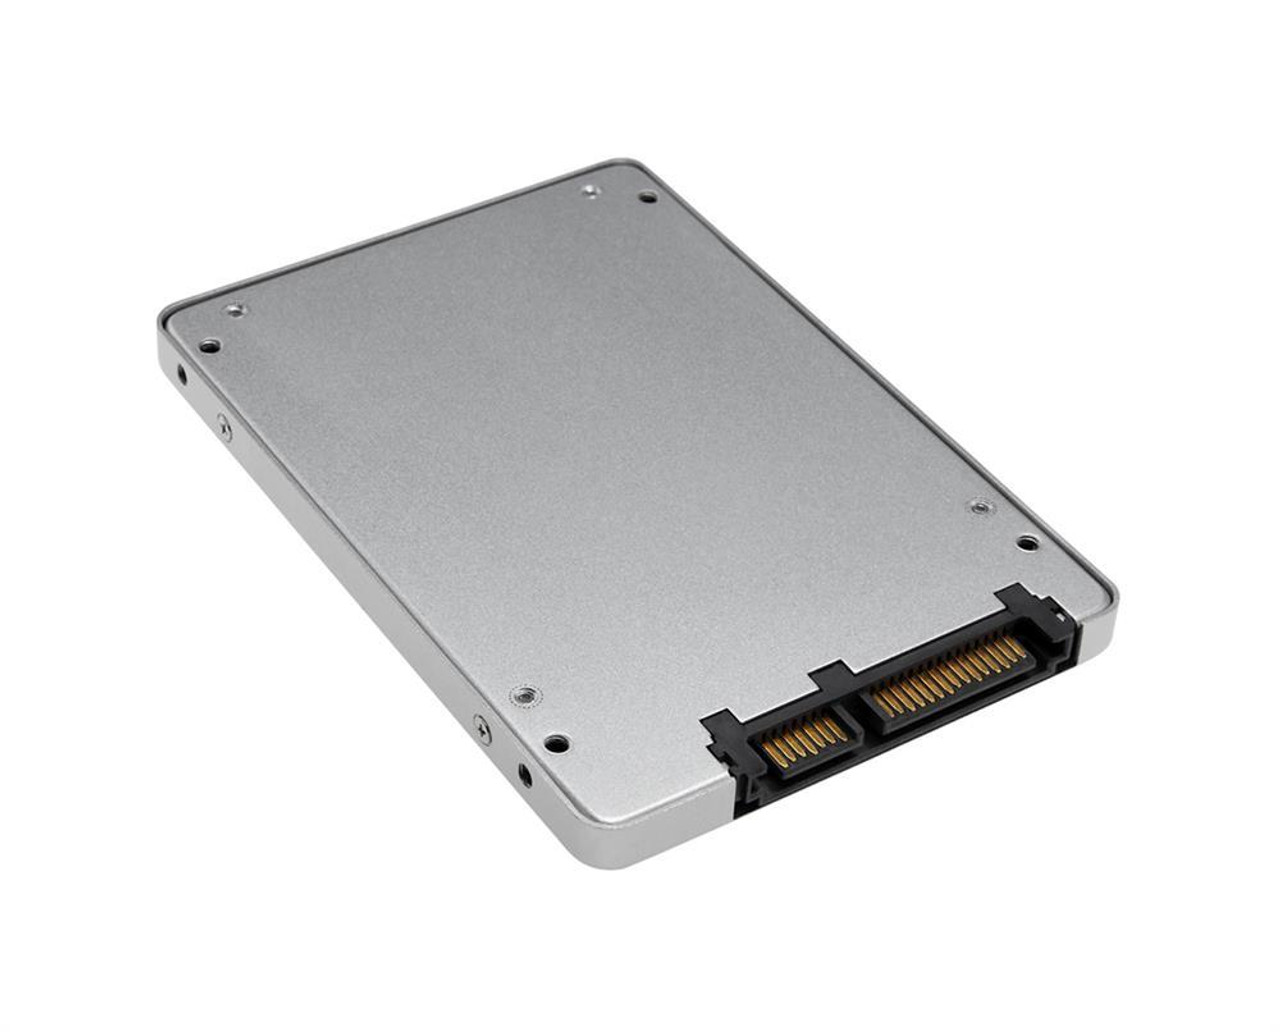 03B0100021000 ASUS 256GB SATA 6Gbps 2.5-inch Internal Solid State Drive (SSD) for M51AD G30AB G10AC and VM60